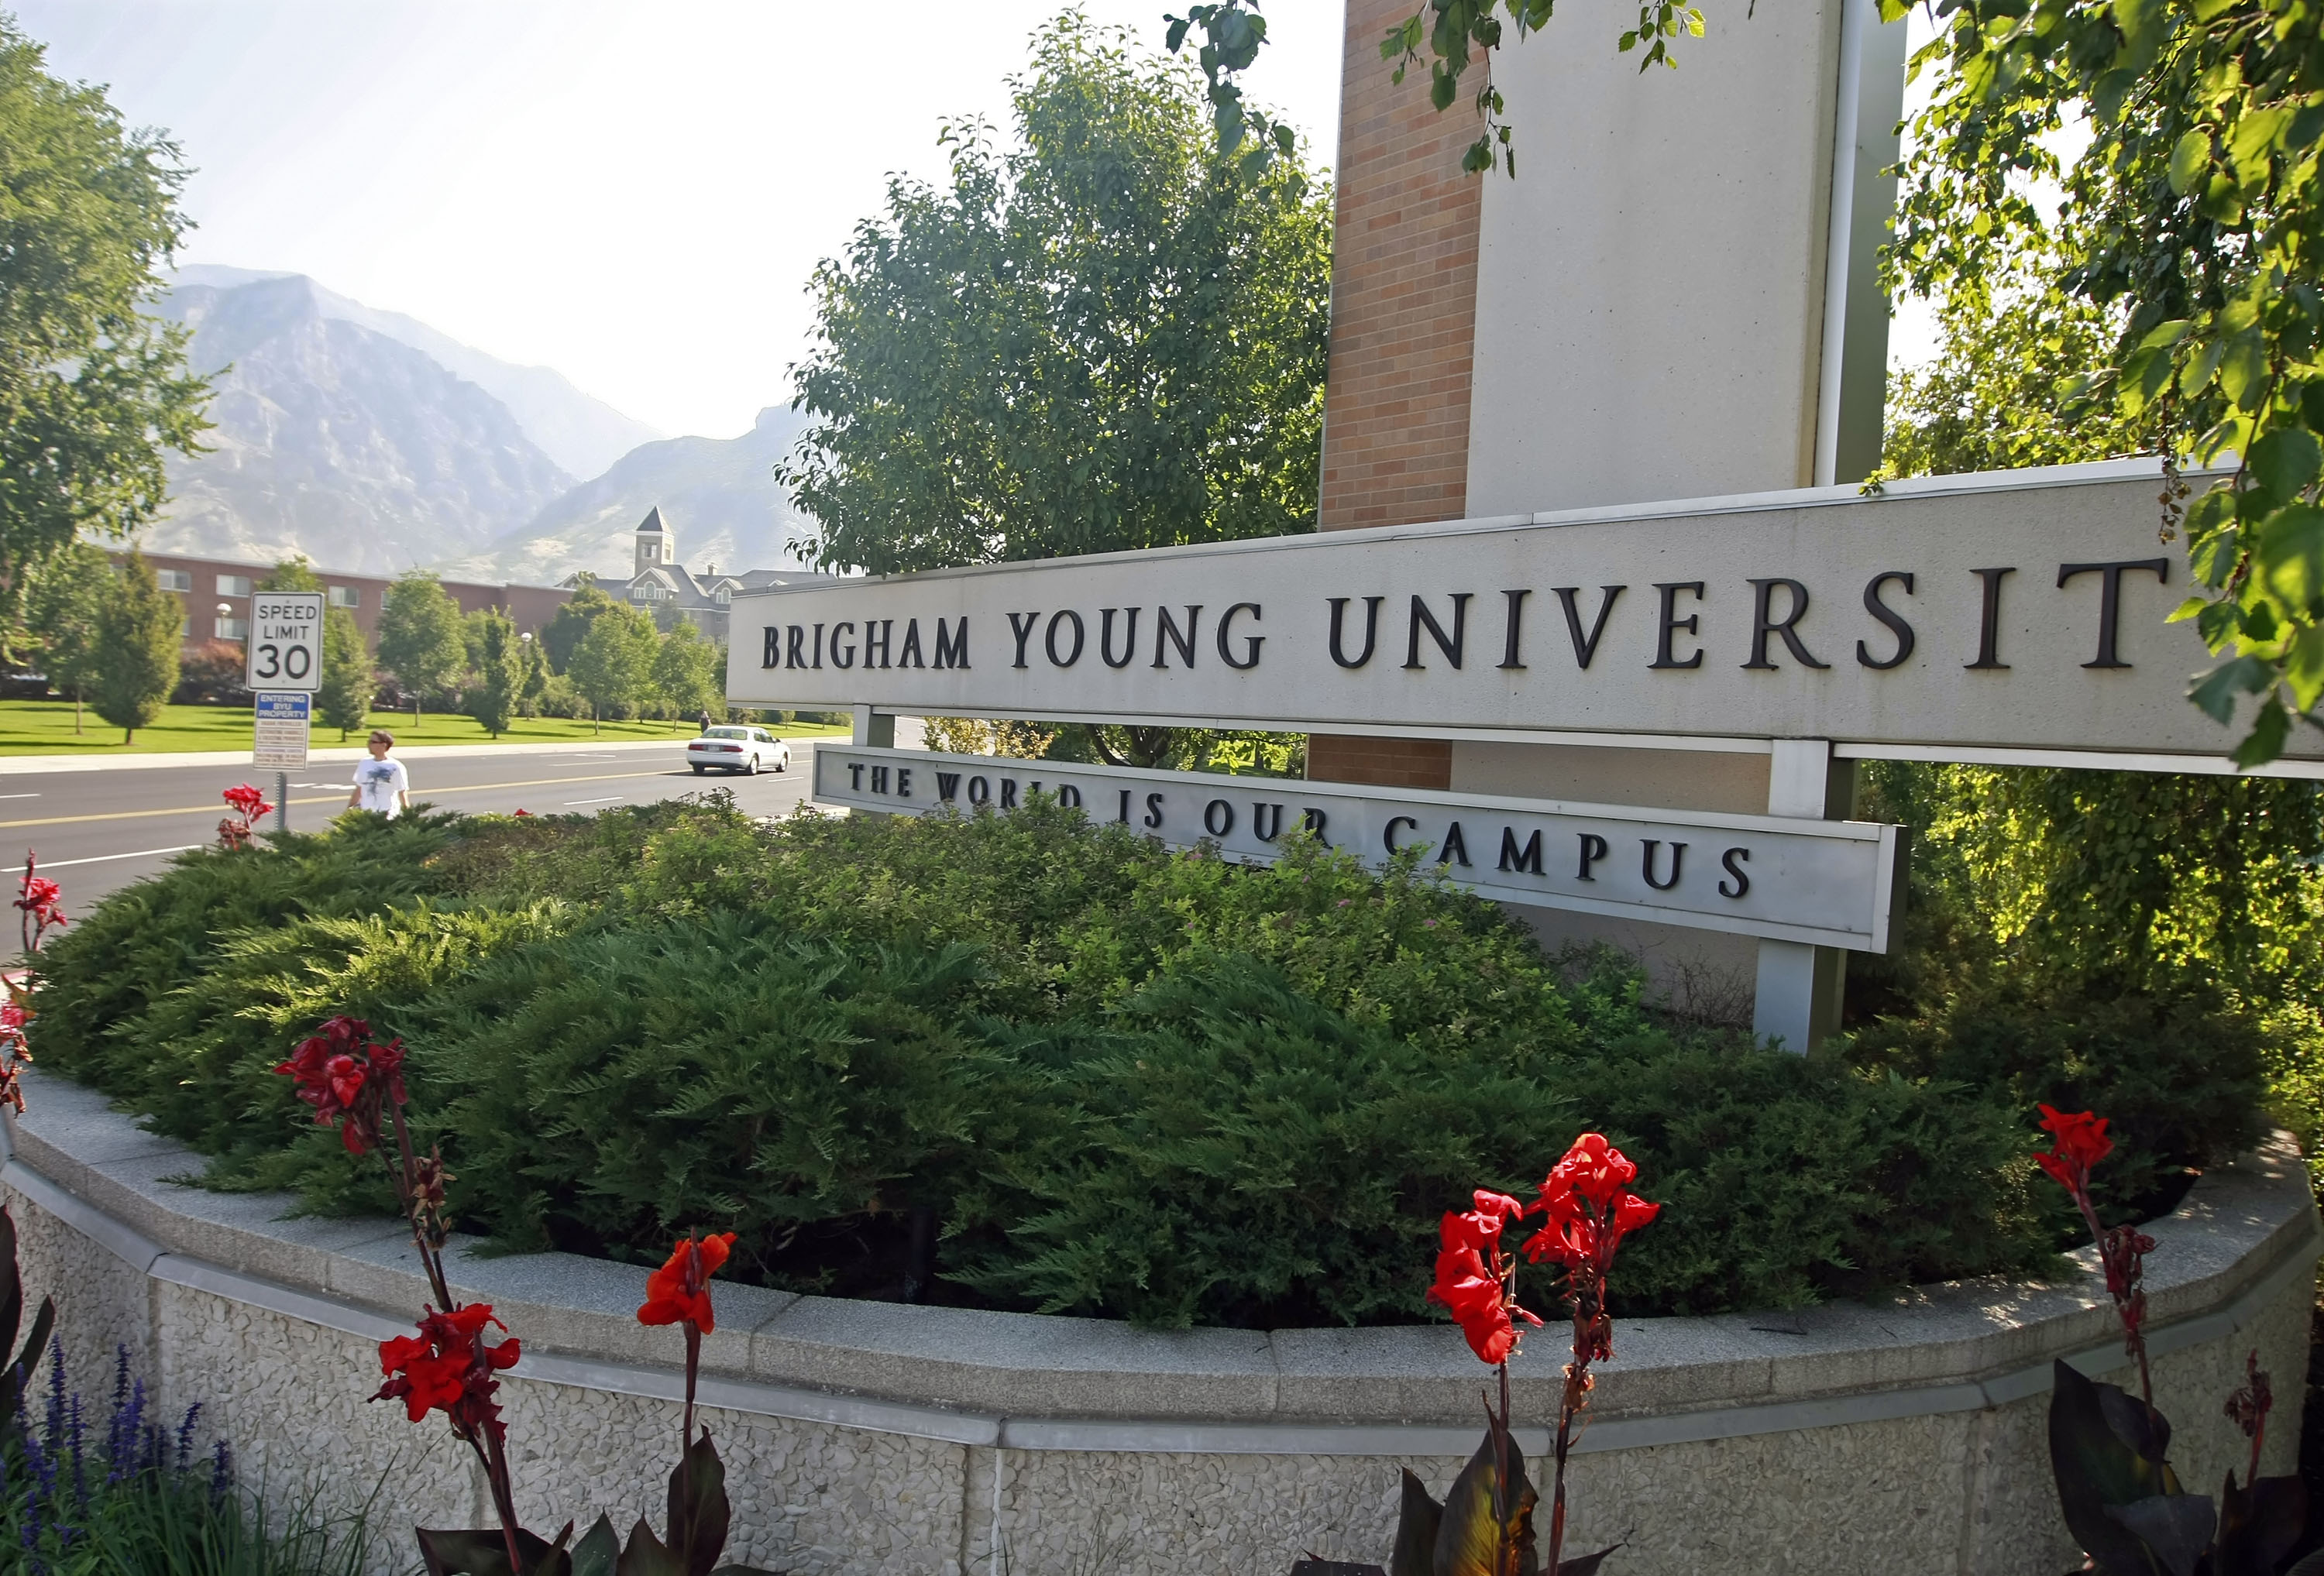 A sign stands at the main entrance to the campus of Brigham Young University in Provo, Utah, U.S., on Tuesday, Sept. 1, 2009. People in the Mormon community, including college students, were the targets of a fraud perpetrated by record producer Henry Jones and Tri Energy Inc., the U.S. Securities and Exchange Commission alleges. (George Frey&mdash;Bloomberg / Getty Images)